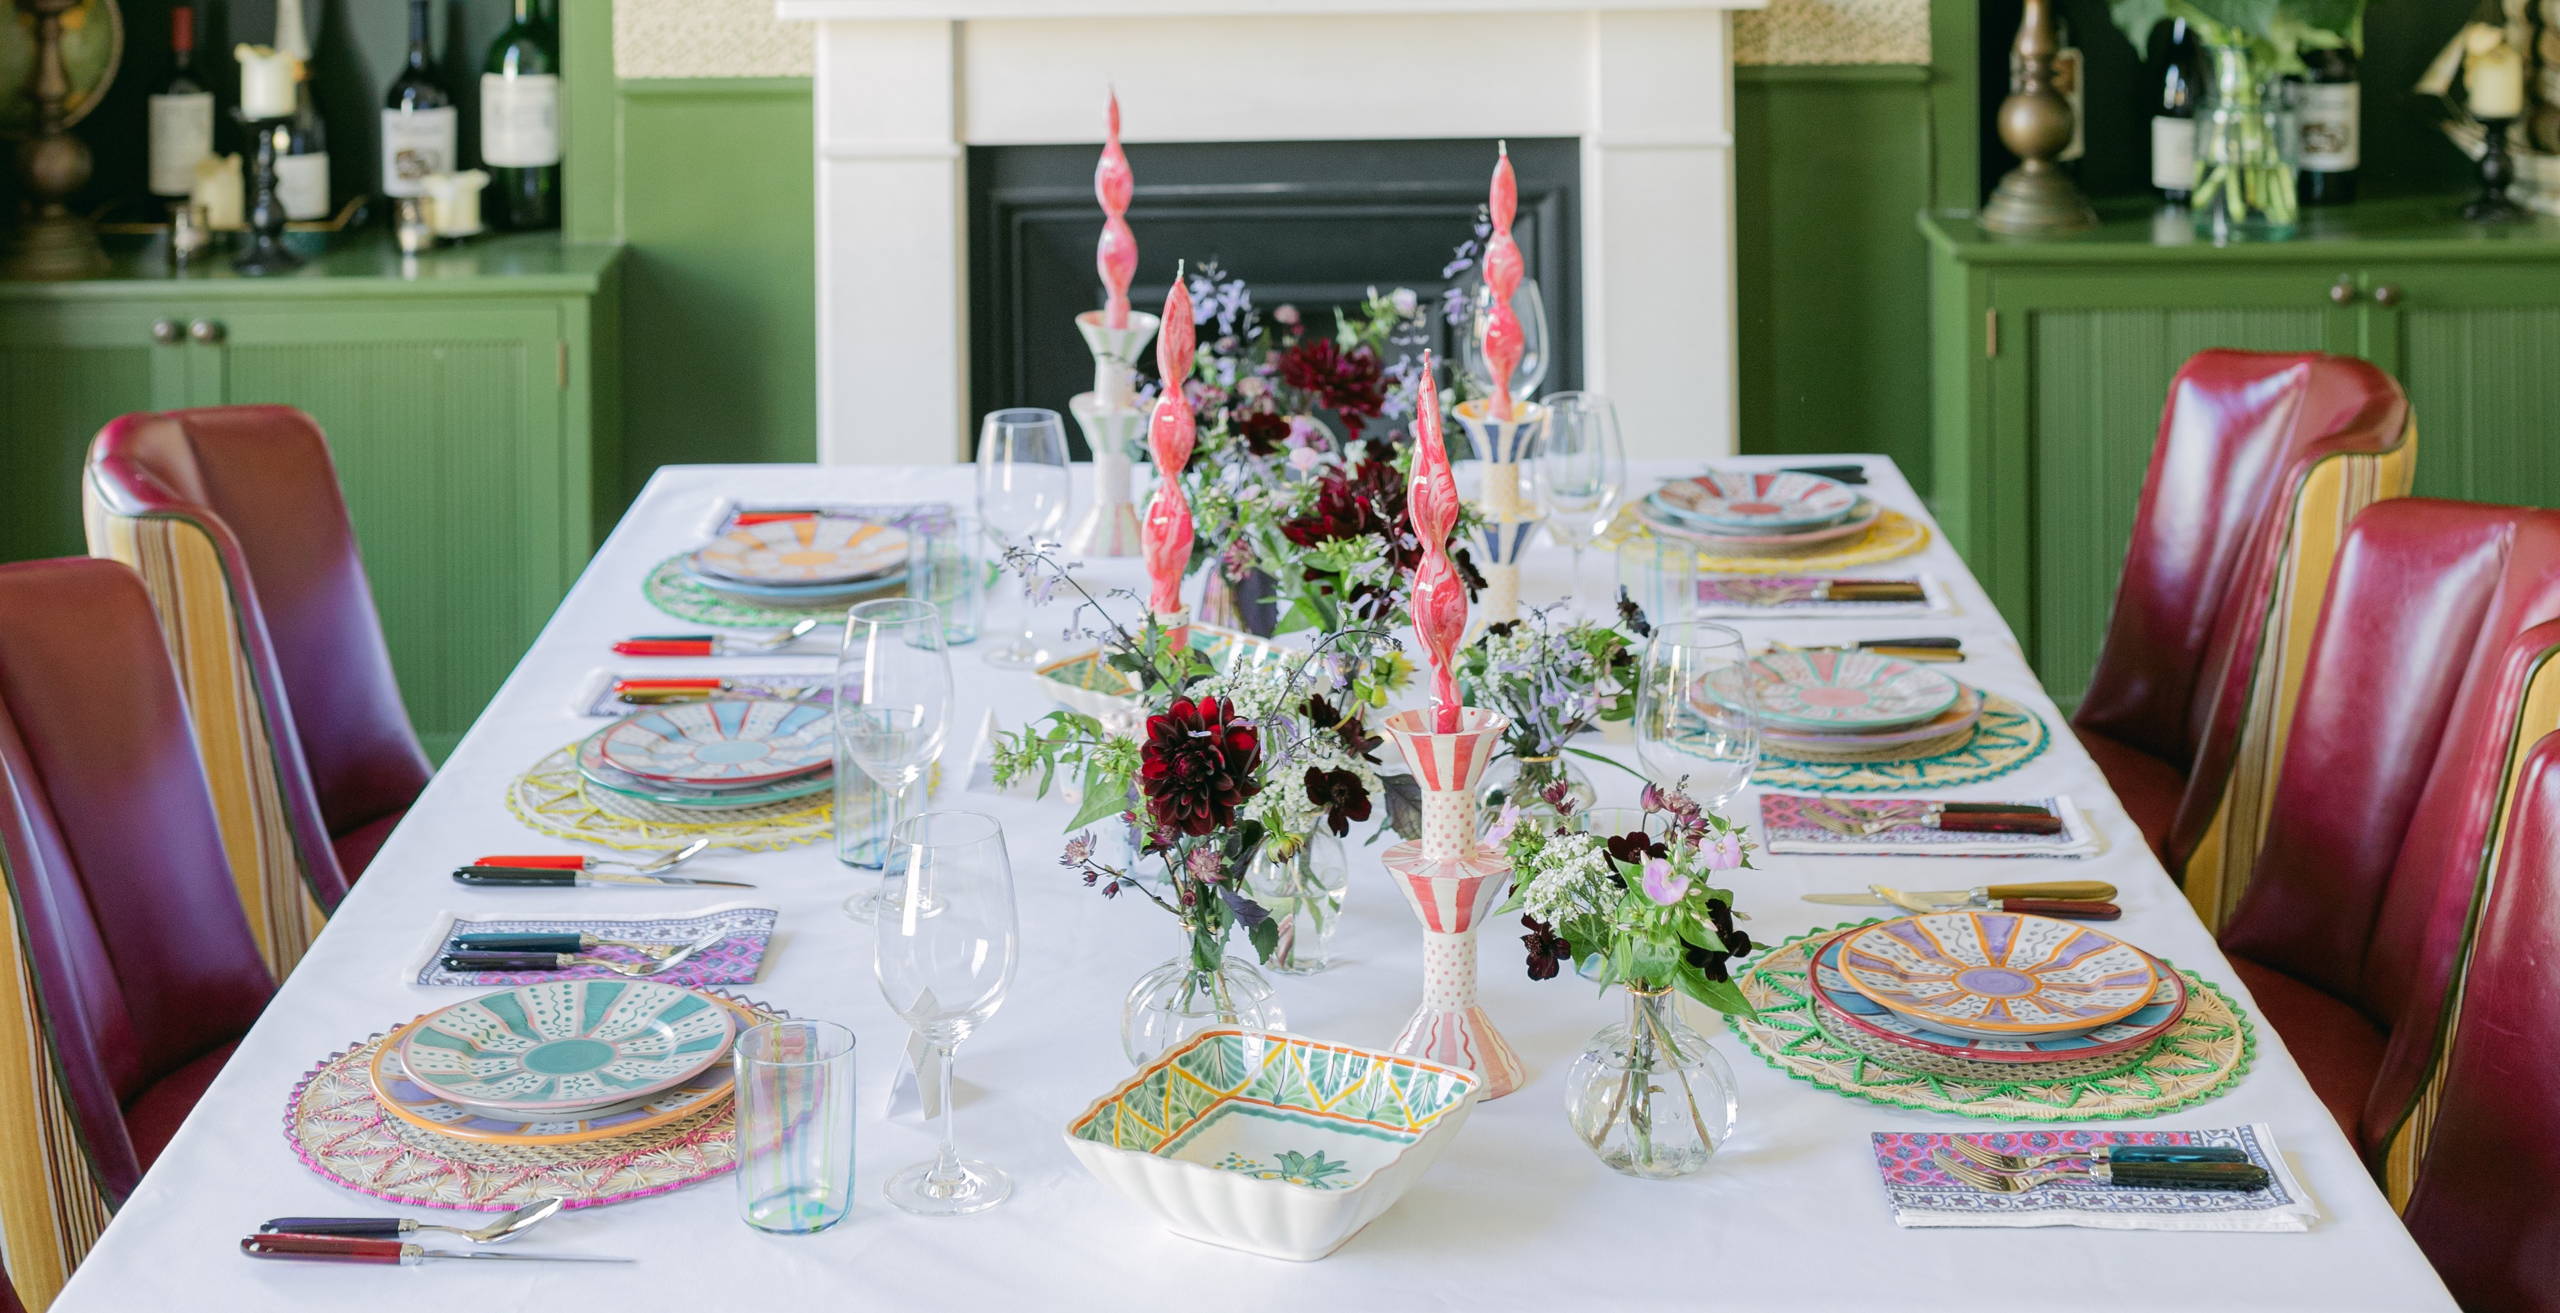 Bright fiesta themed tablescape with beatiful fresh flowers